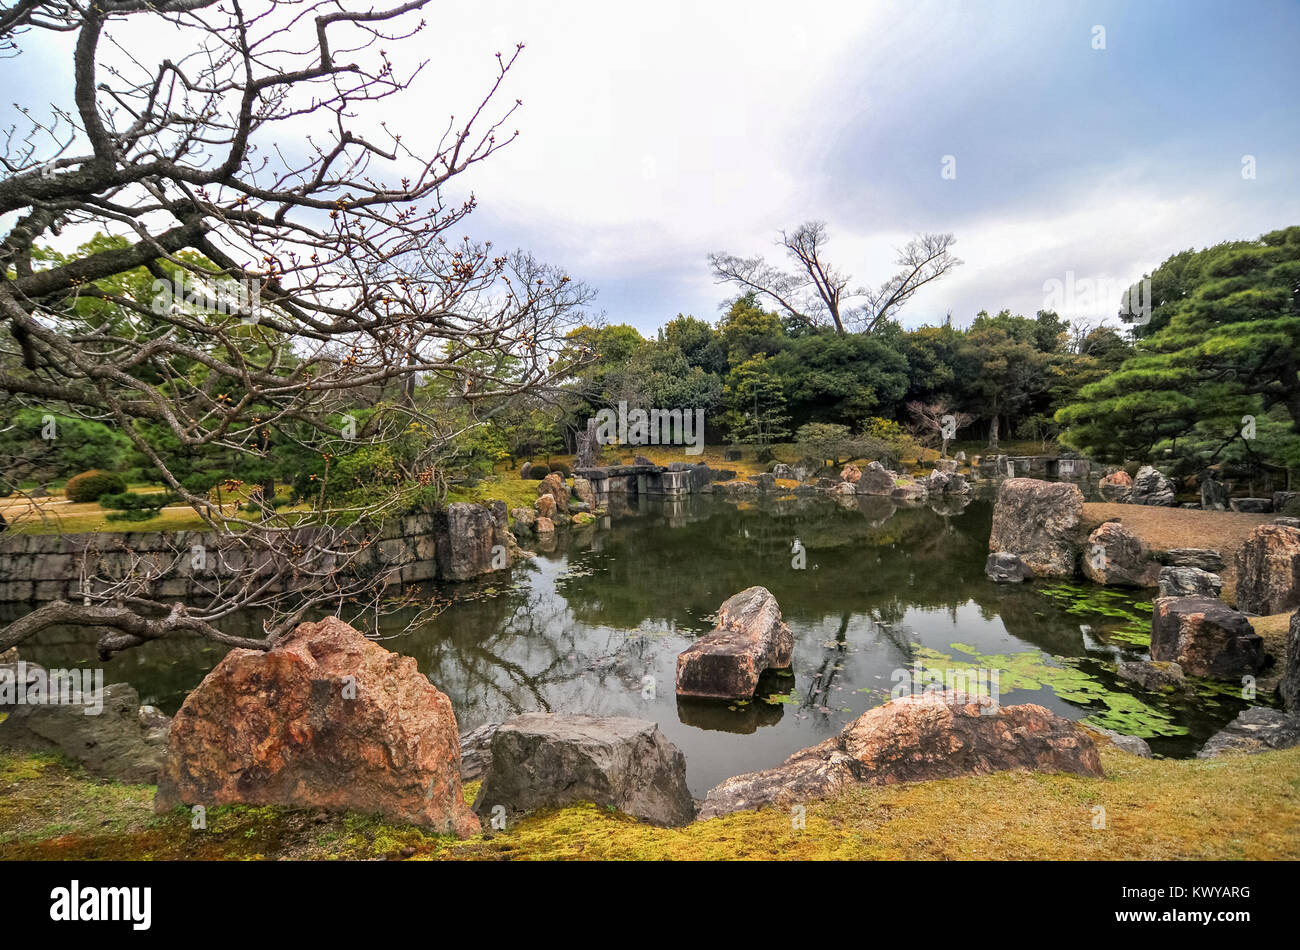 Nijo Castle in Kyoto , Japan. It is one of the seventeen Historic Monuments of Ancient Kyoto. Stock Photo